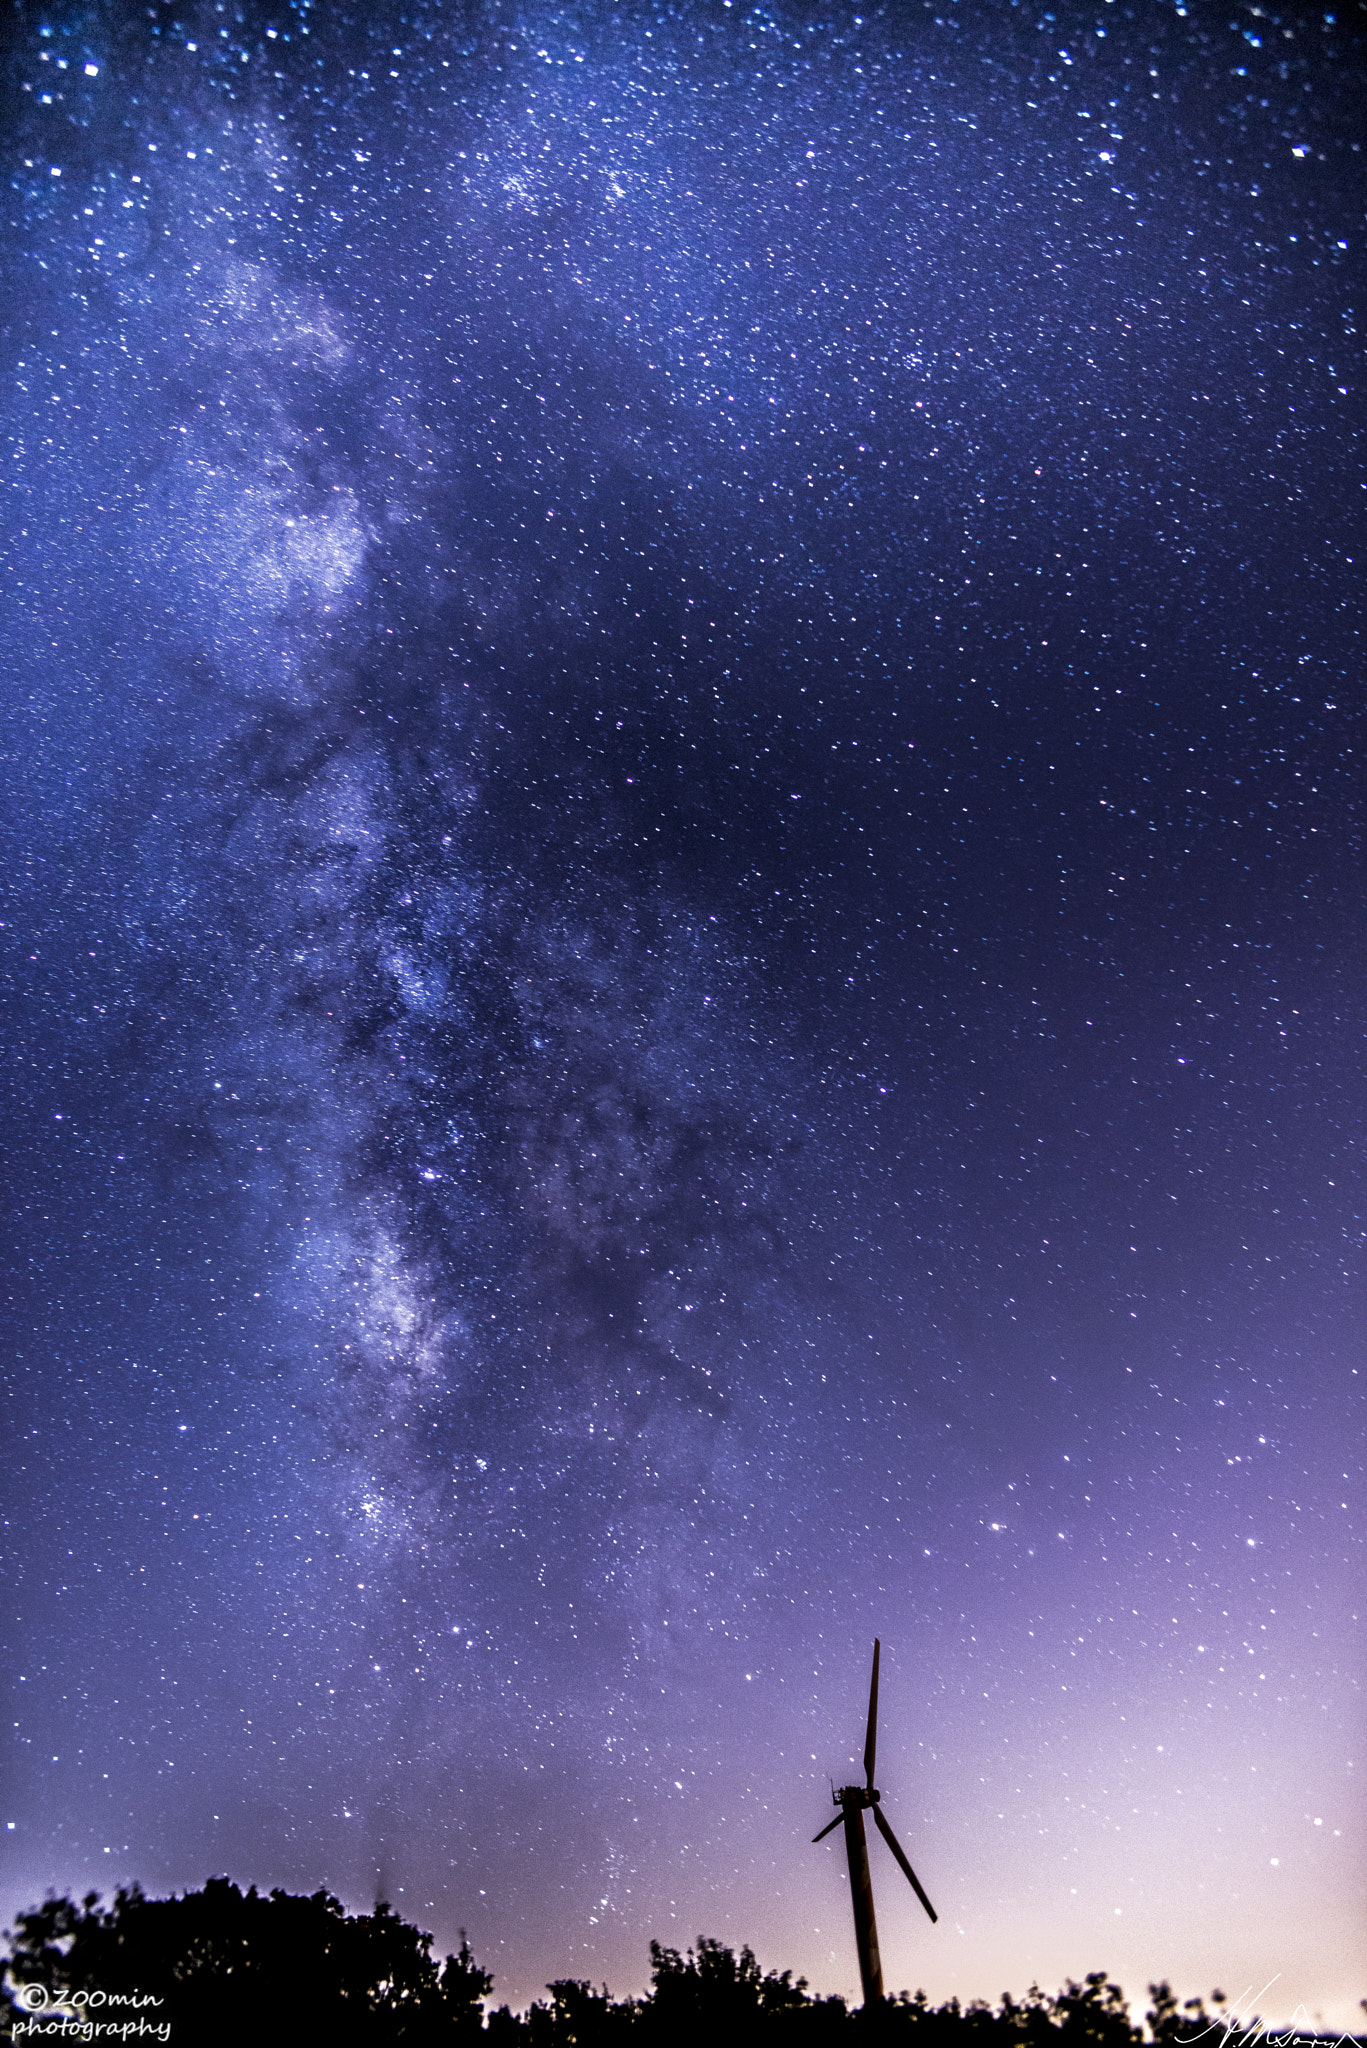 Nikon D800E + AF-S DX Zoom-Nikkor 18-55mm f/3.5-5.6G ED sample photo. The amazing milky way photography